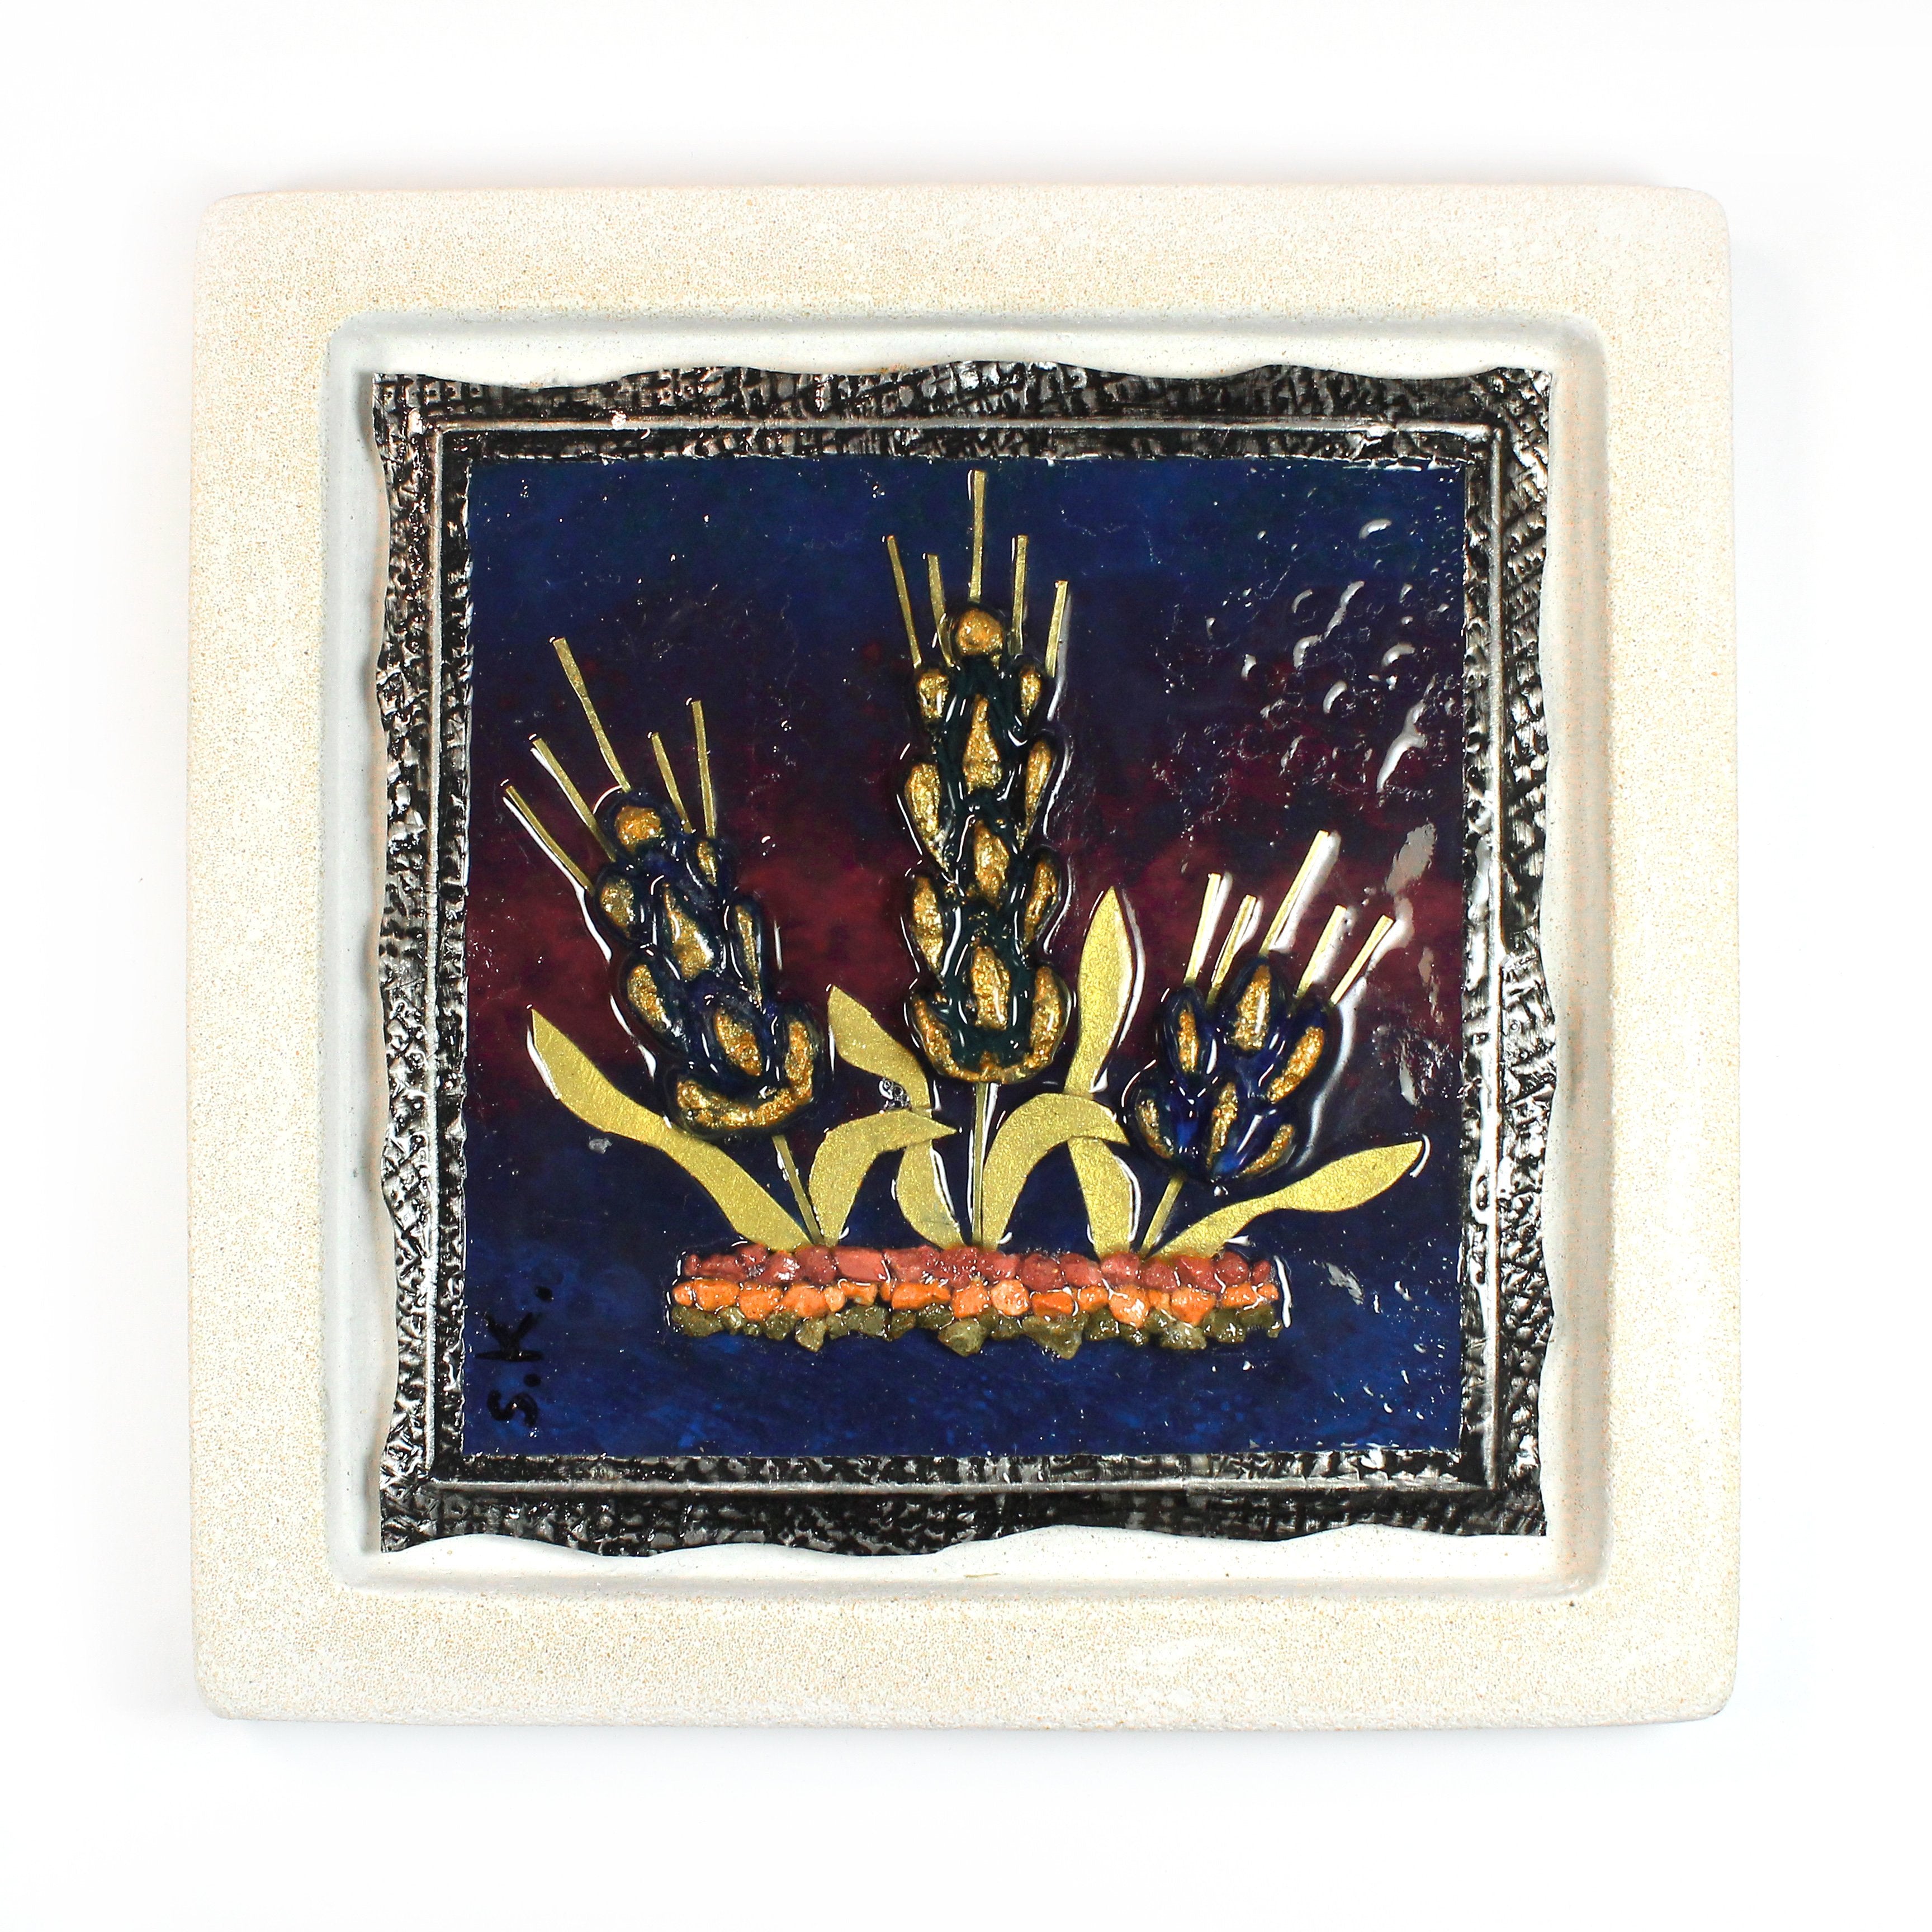 Wheat - Jerusalem Cast Stone Picture - Shulamit Kanter Official Store